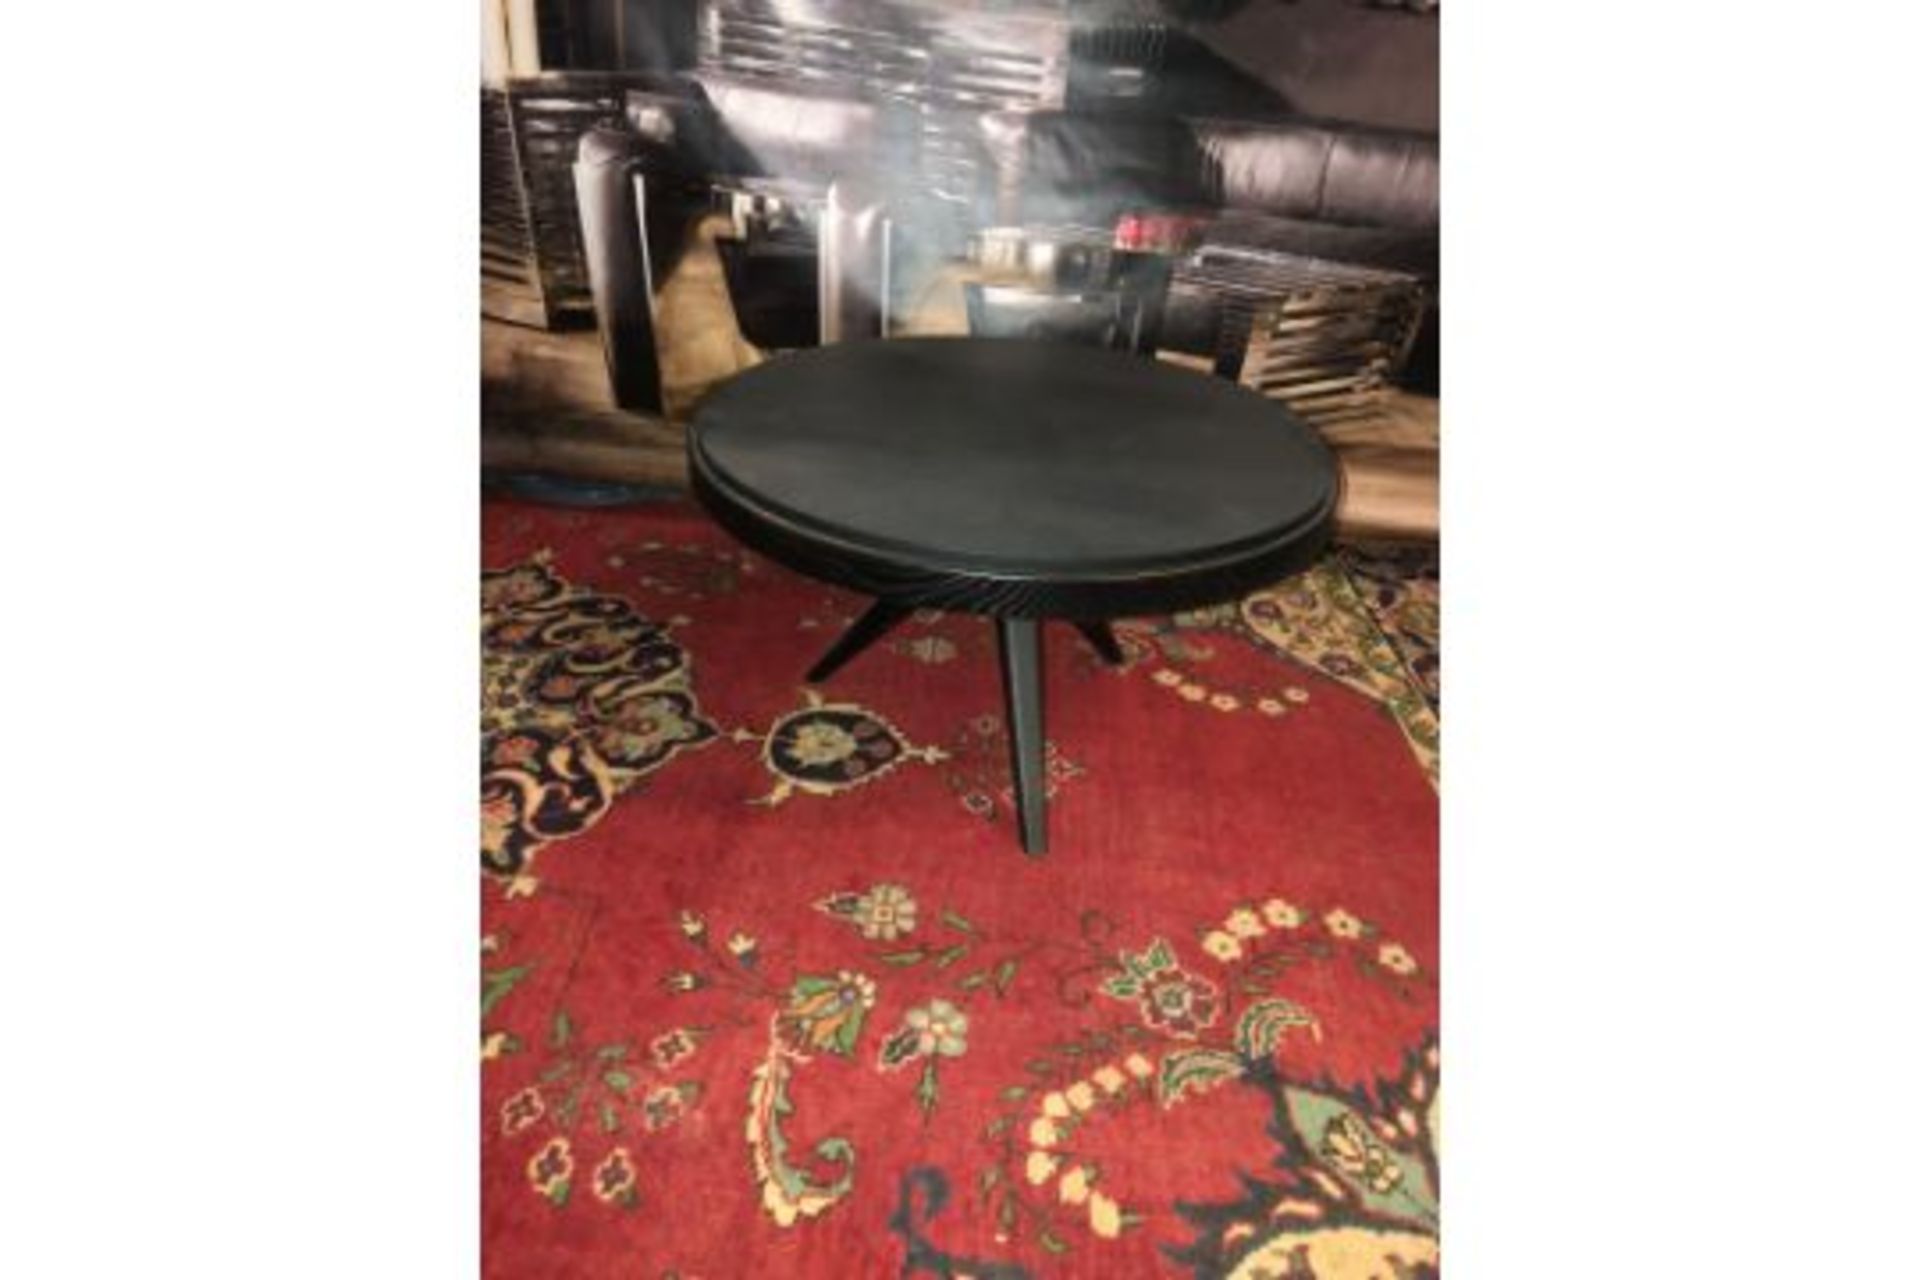 Cosmopolitan Coffee Table Black Polished Glazed Top With Oak The Geometric Symmetry And